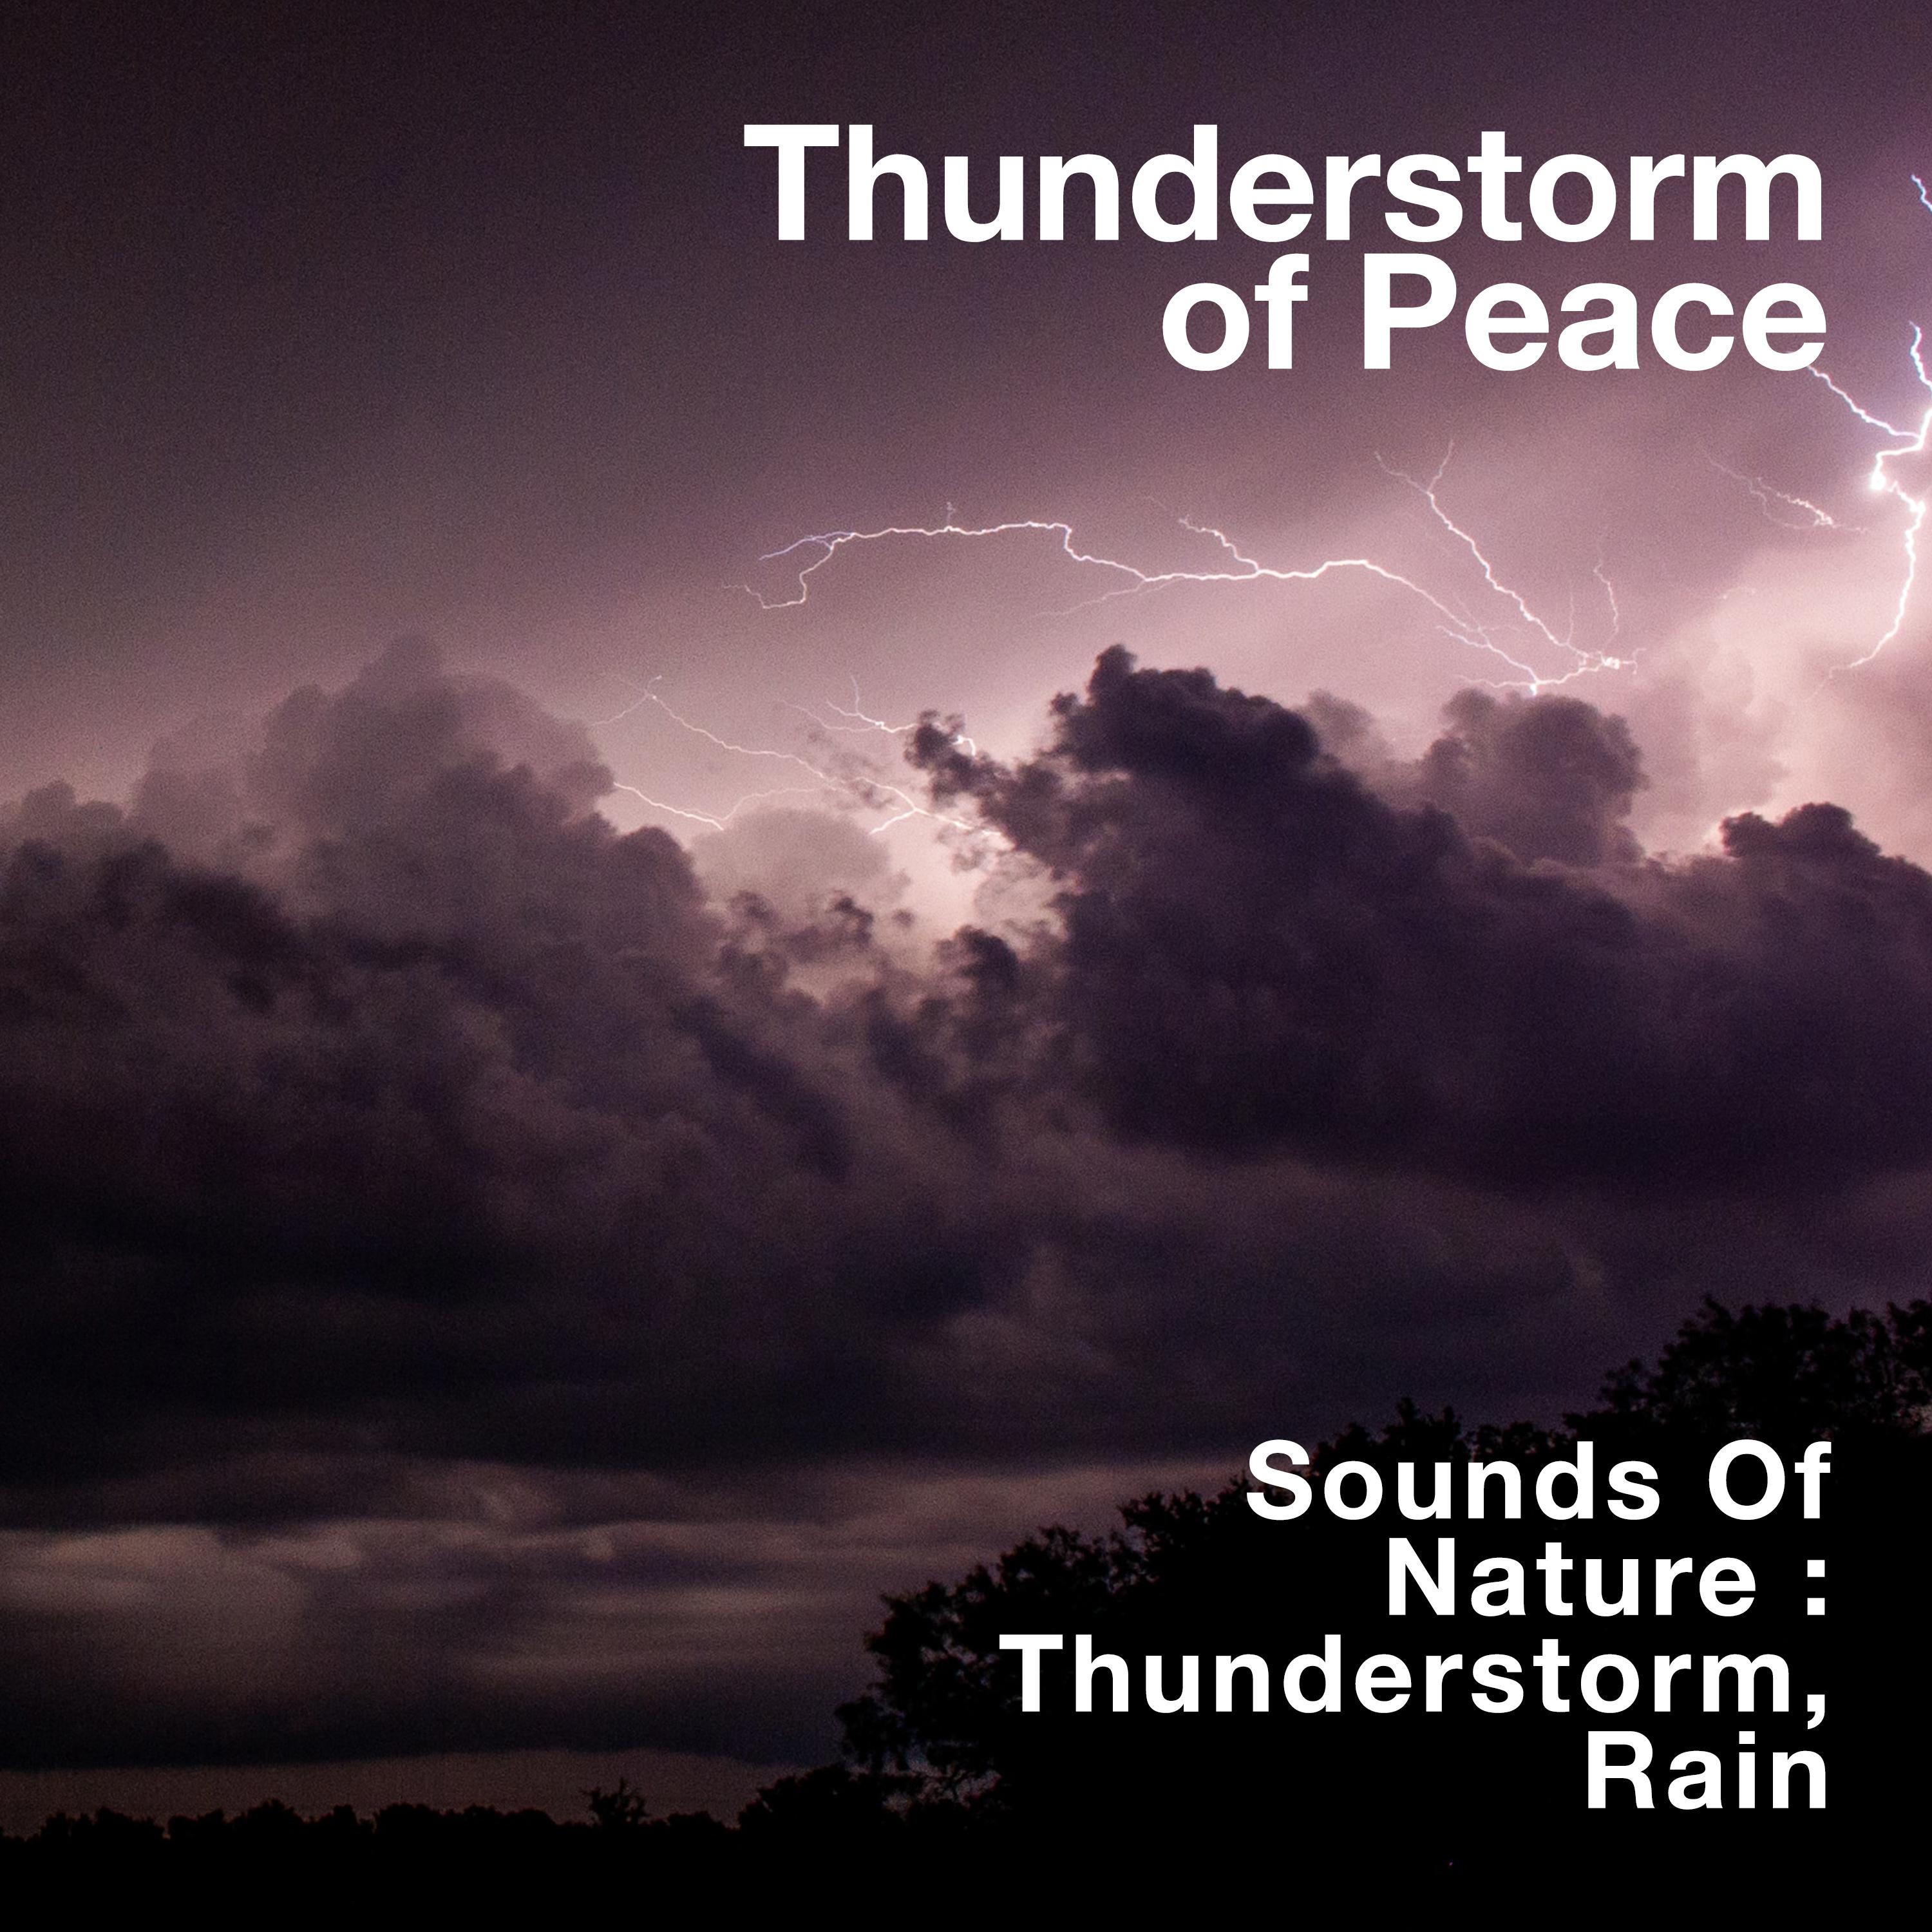 Thunderstorm of Peace